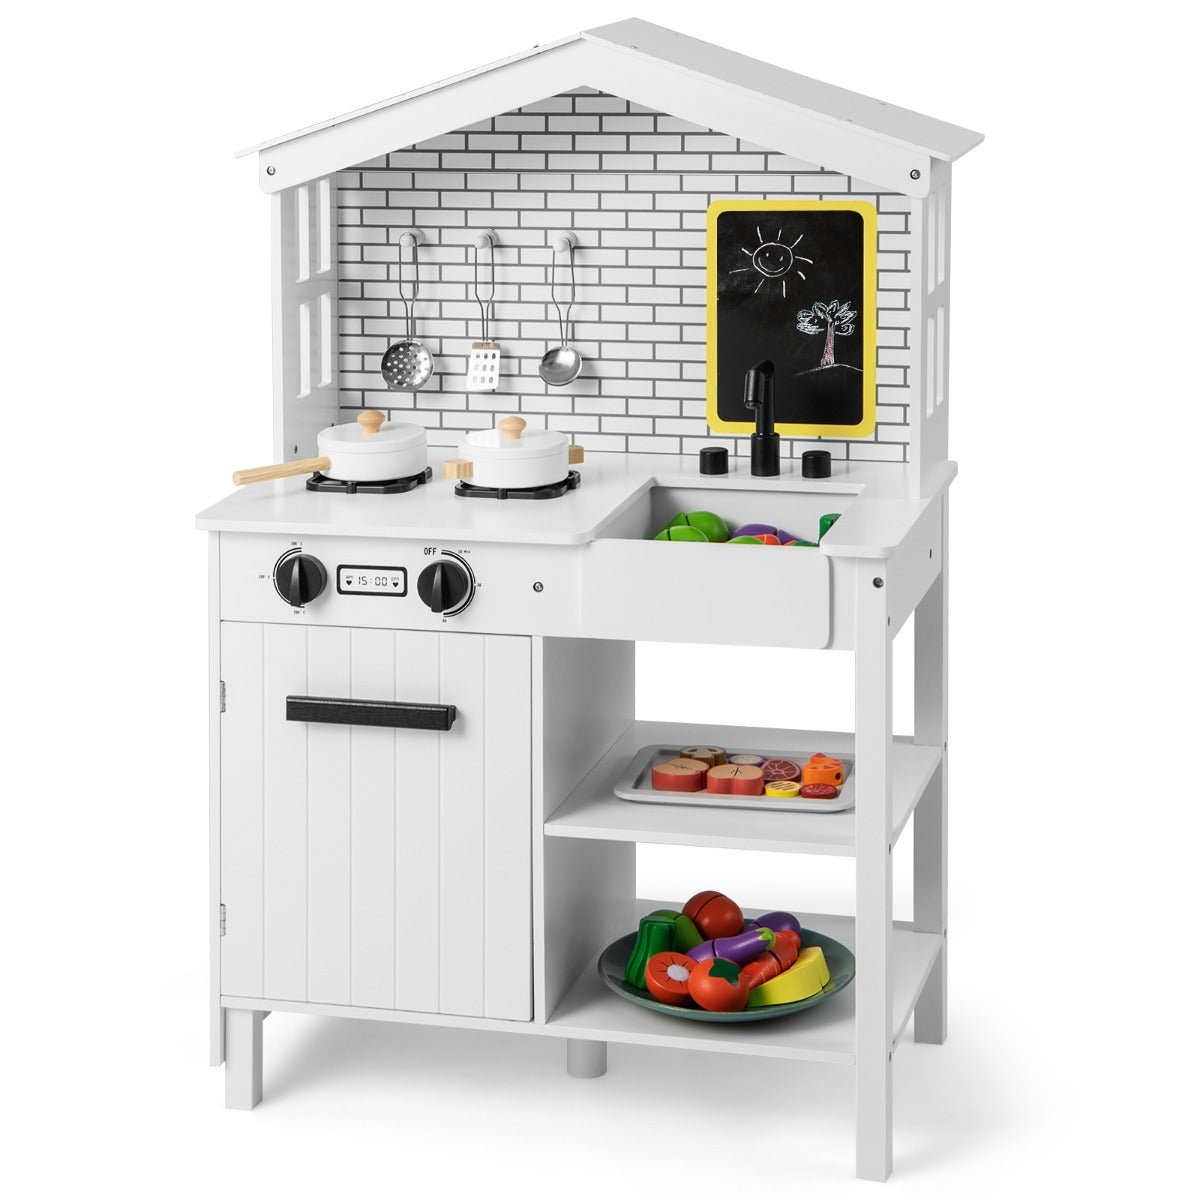 Farmhouse Wooden Play Kitchen Toy - A World of Imagination